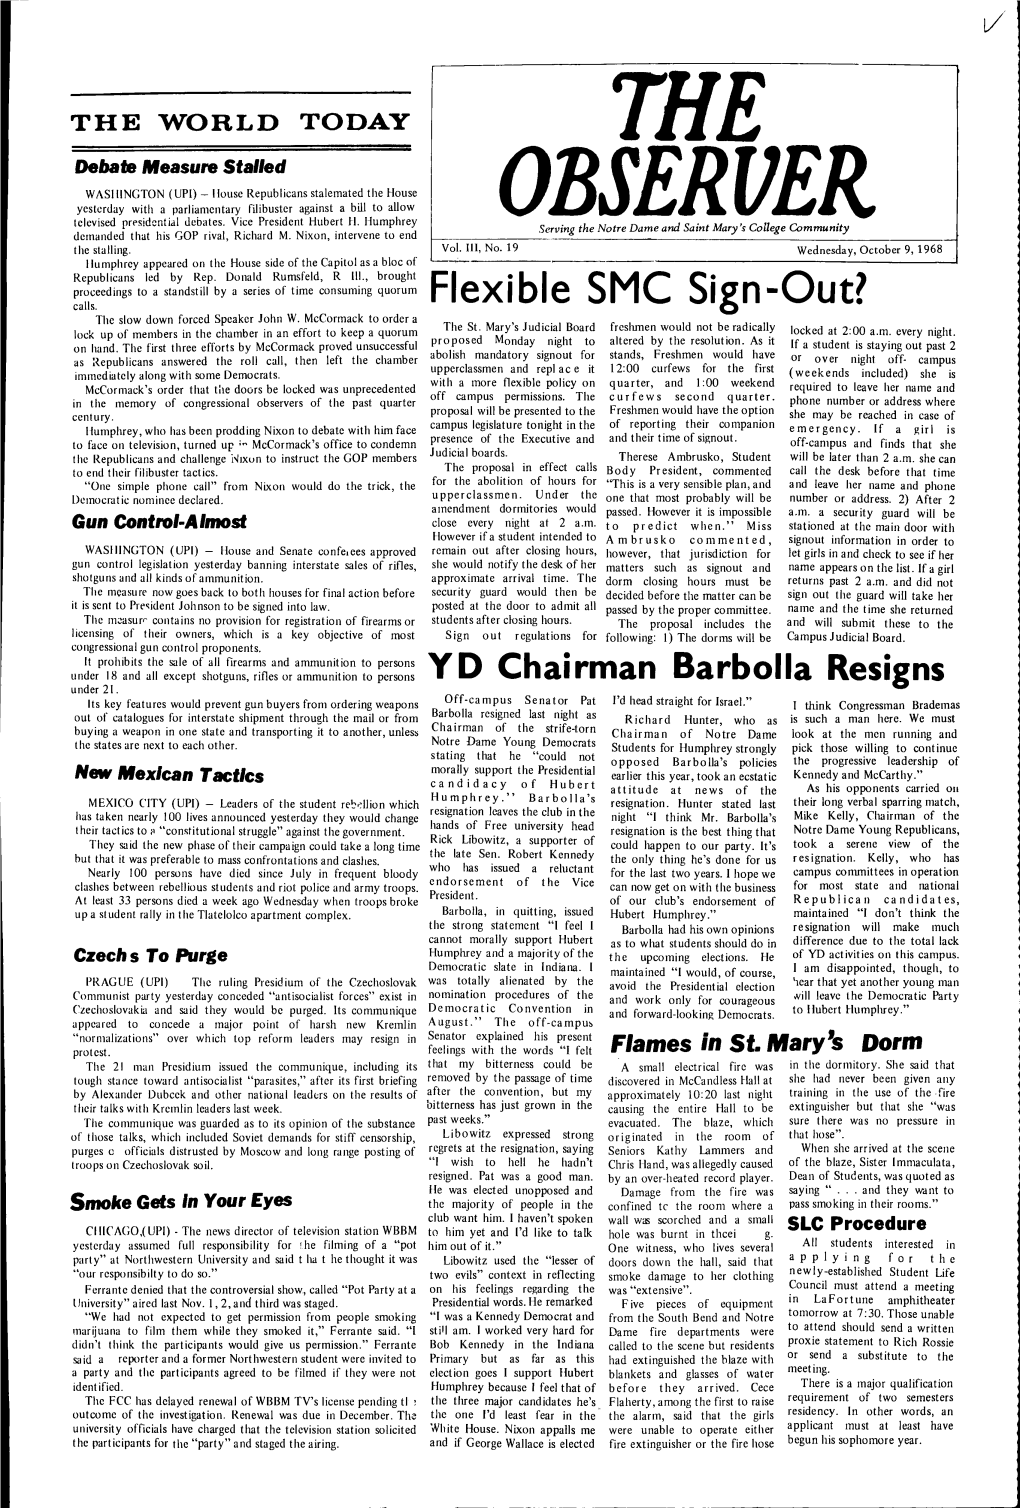 Flexible SMC Sign-Out? the Slow Down Forced Speaker John W